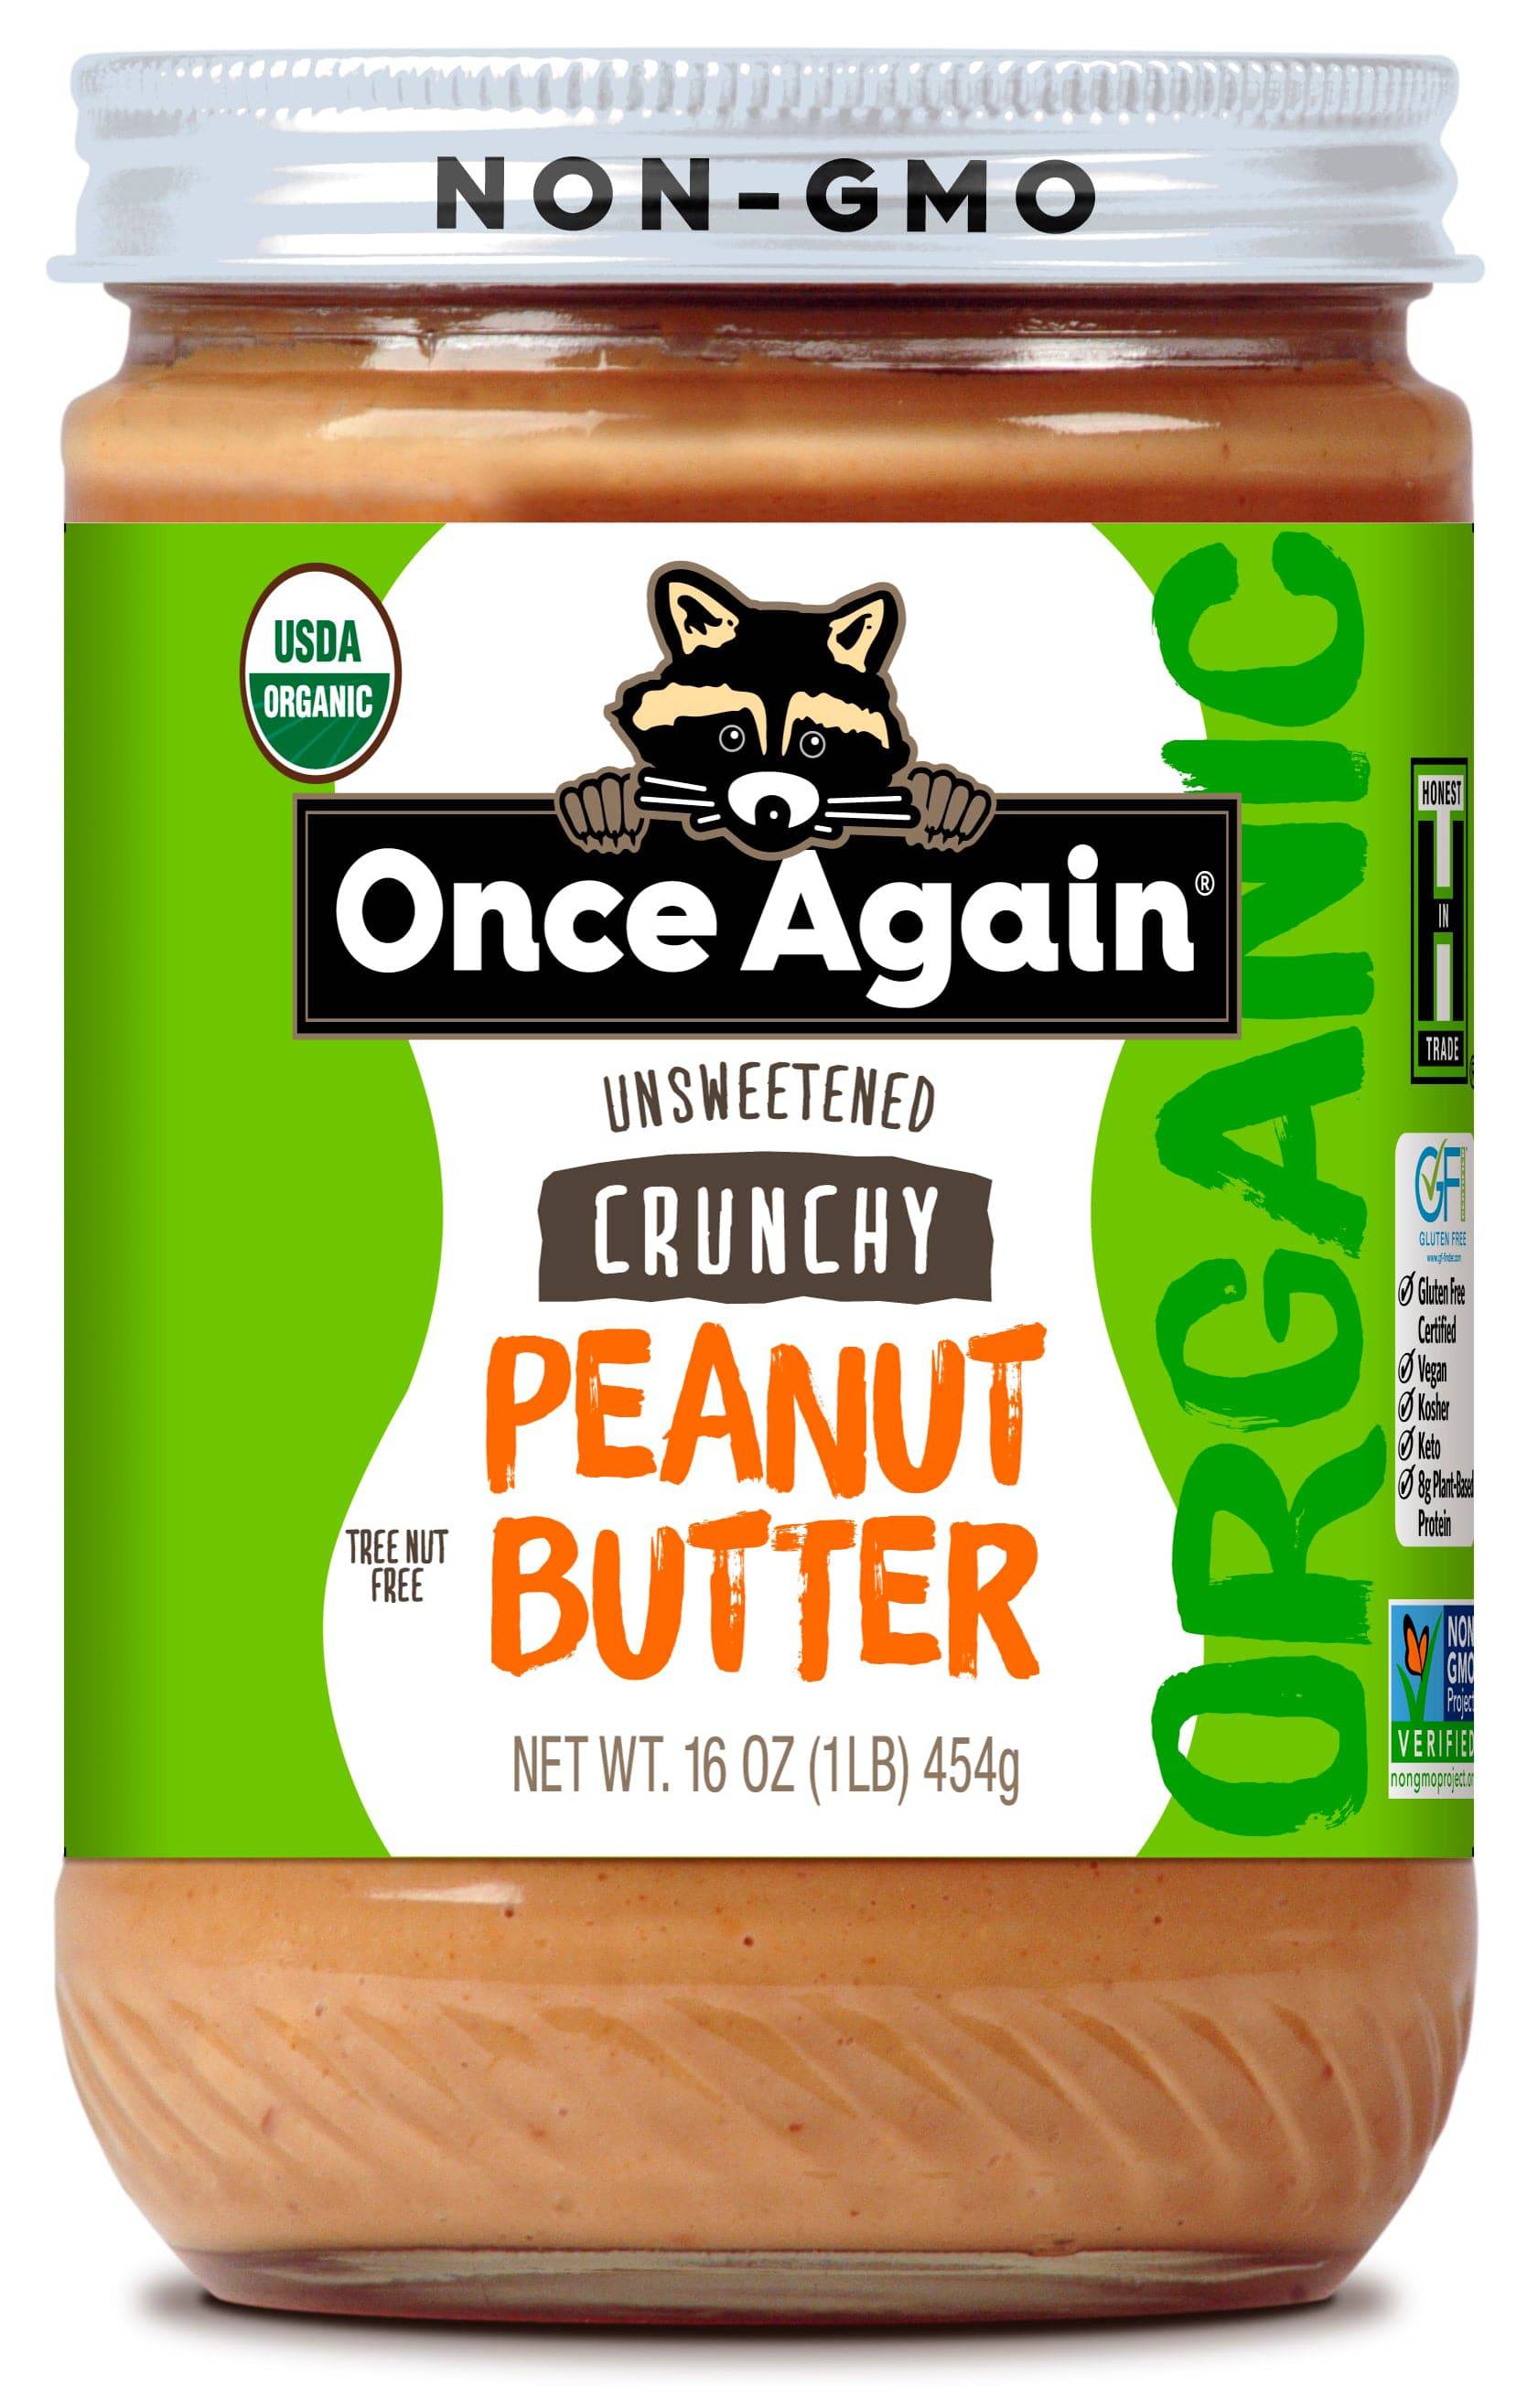 Super Crunchy Peanut Butter – Nuts To You